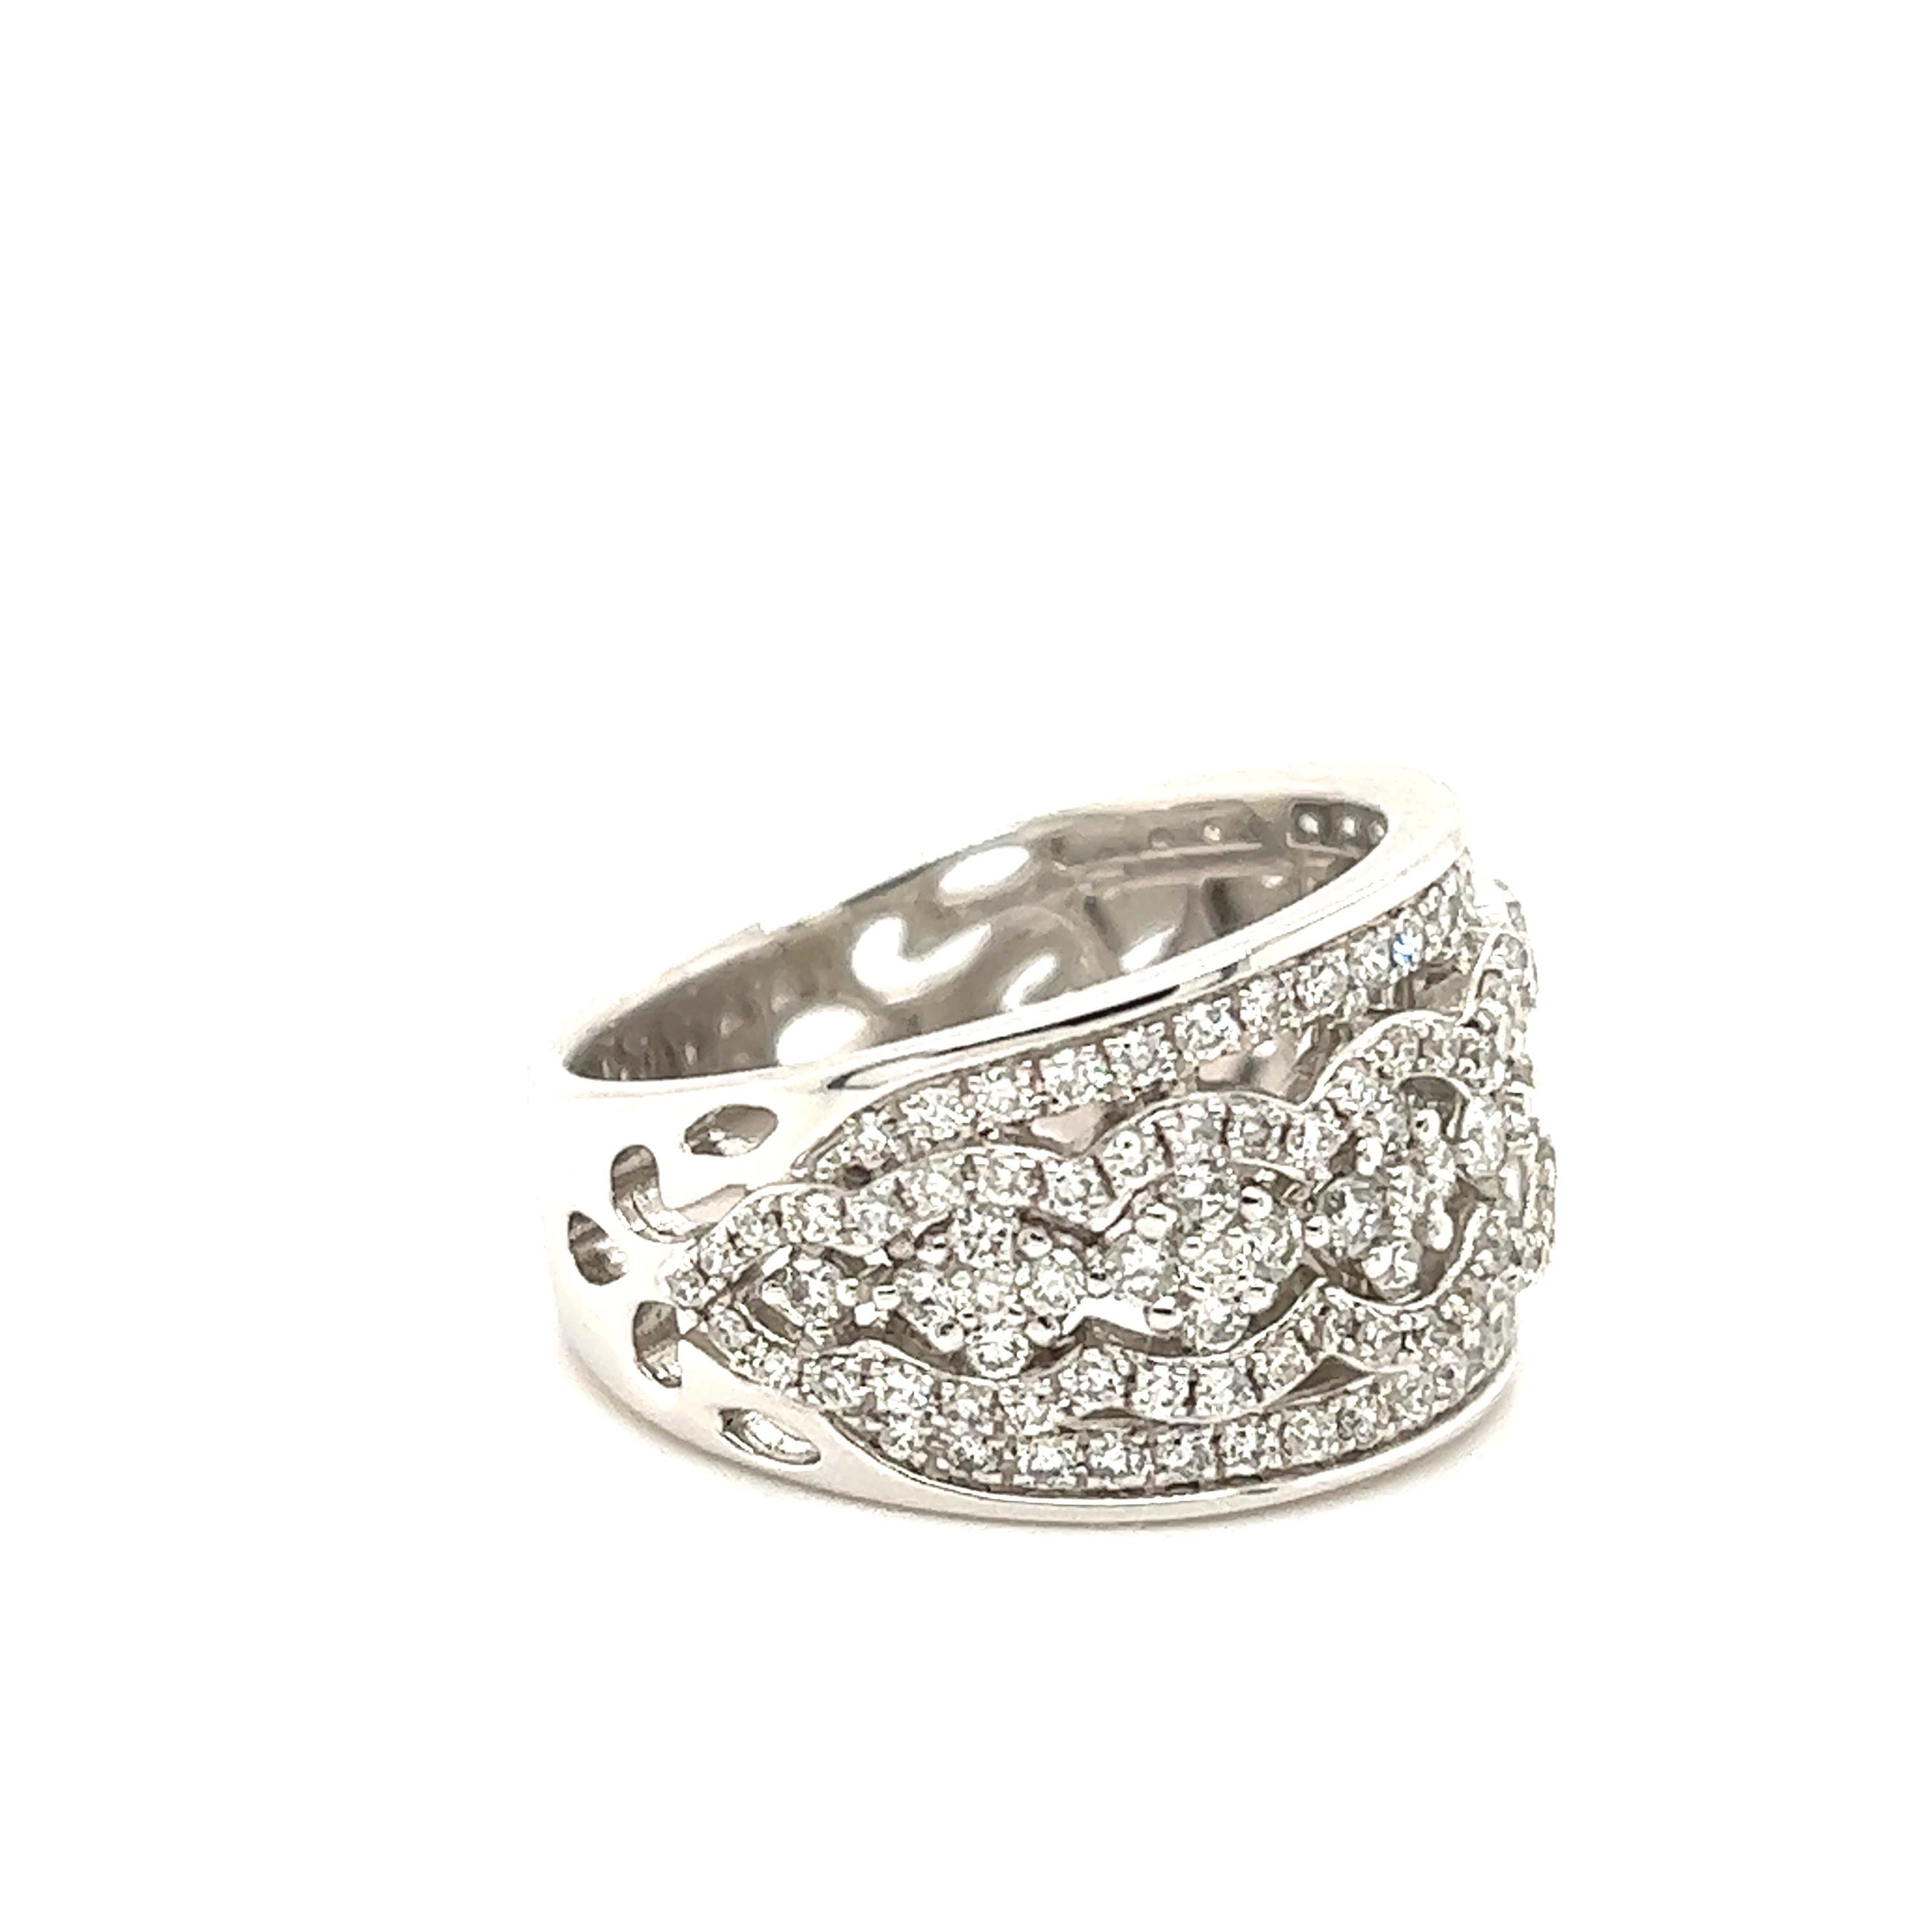 Beautiful ring crafted in 14k white gold. The ring shows a wide band design as the top half measures 12 mm. The brand thins out as it measures 6 mm at the base of the shank. The ring is set with beautiful diamonds approximately 2.01 carat of round